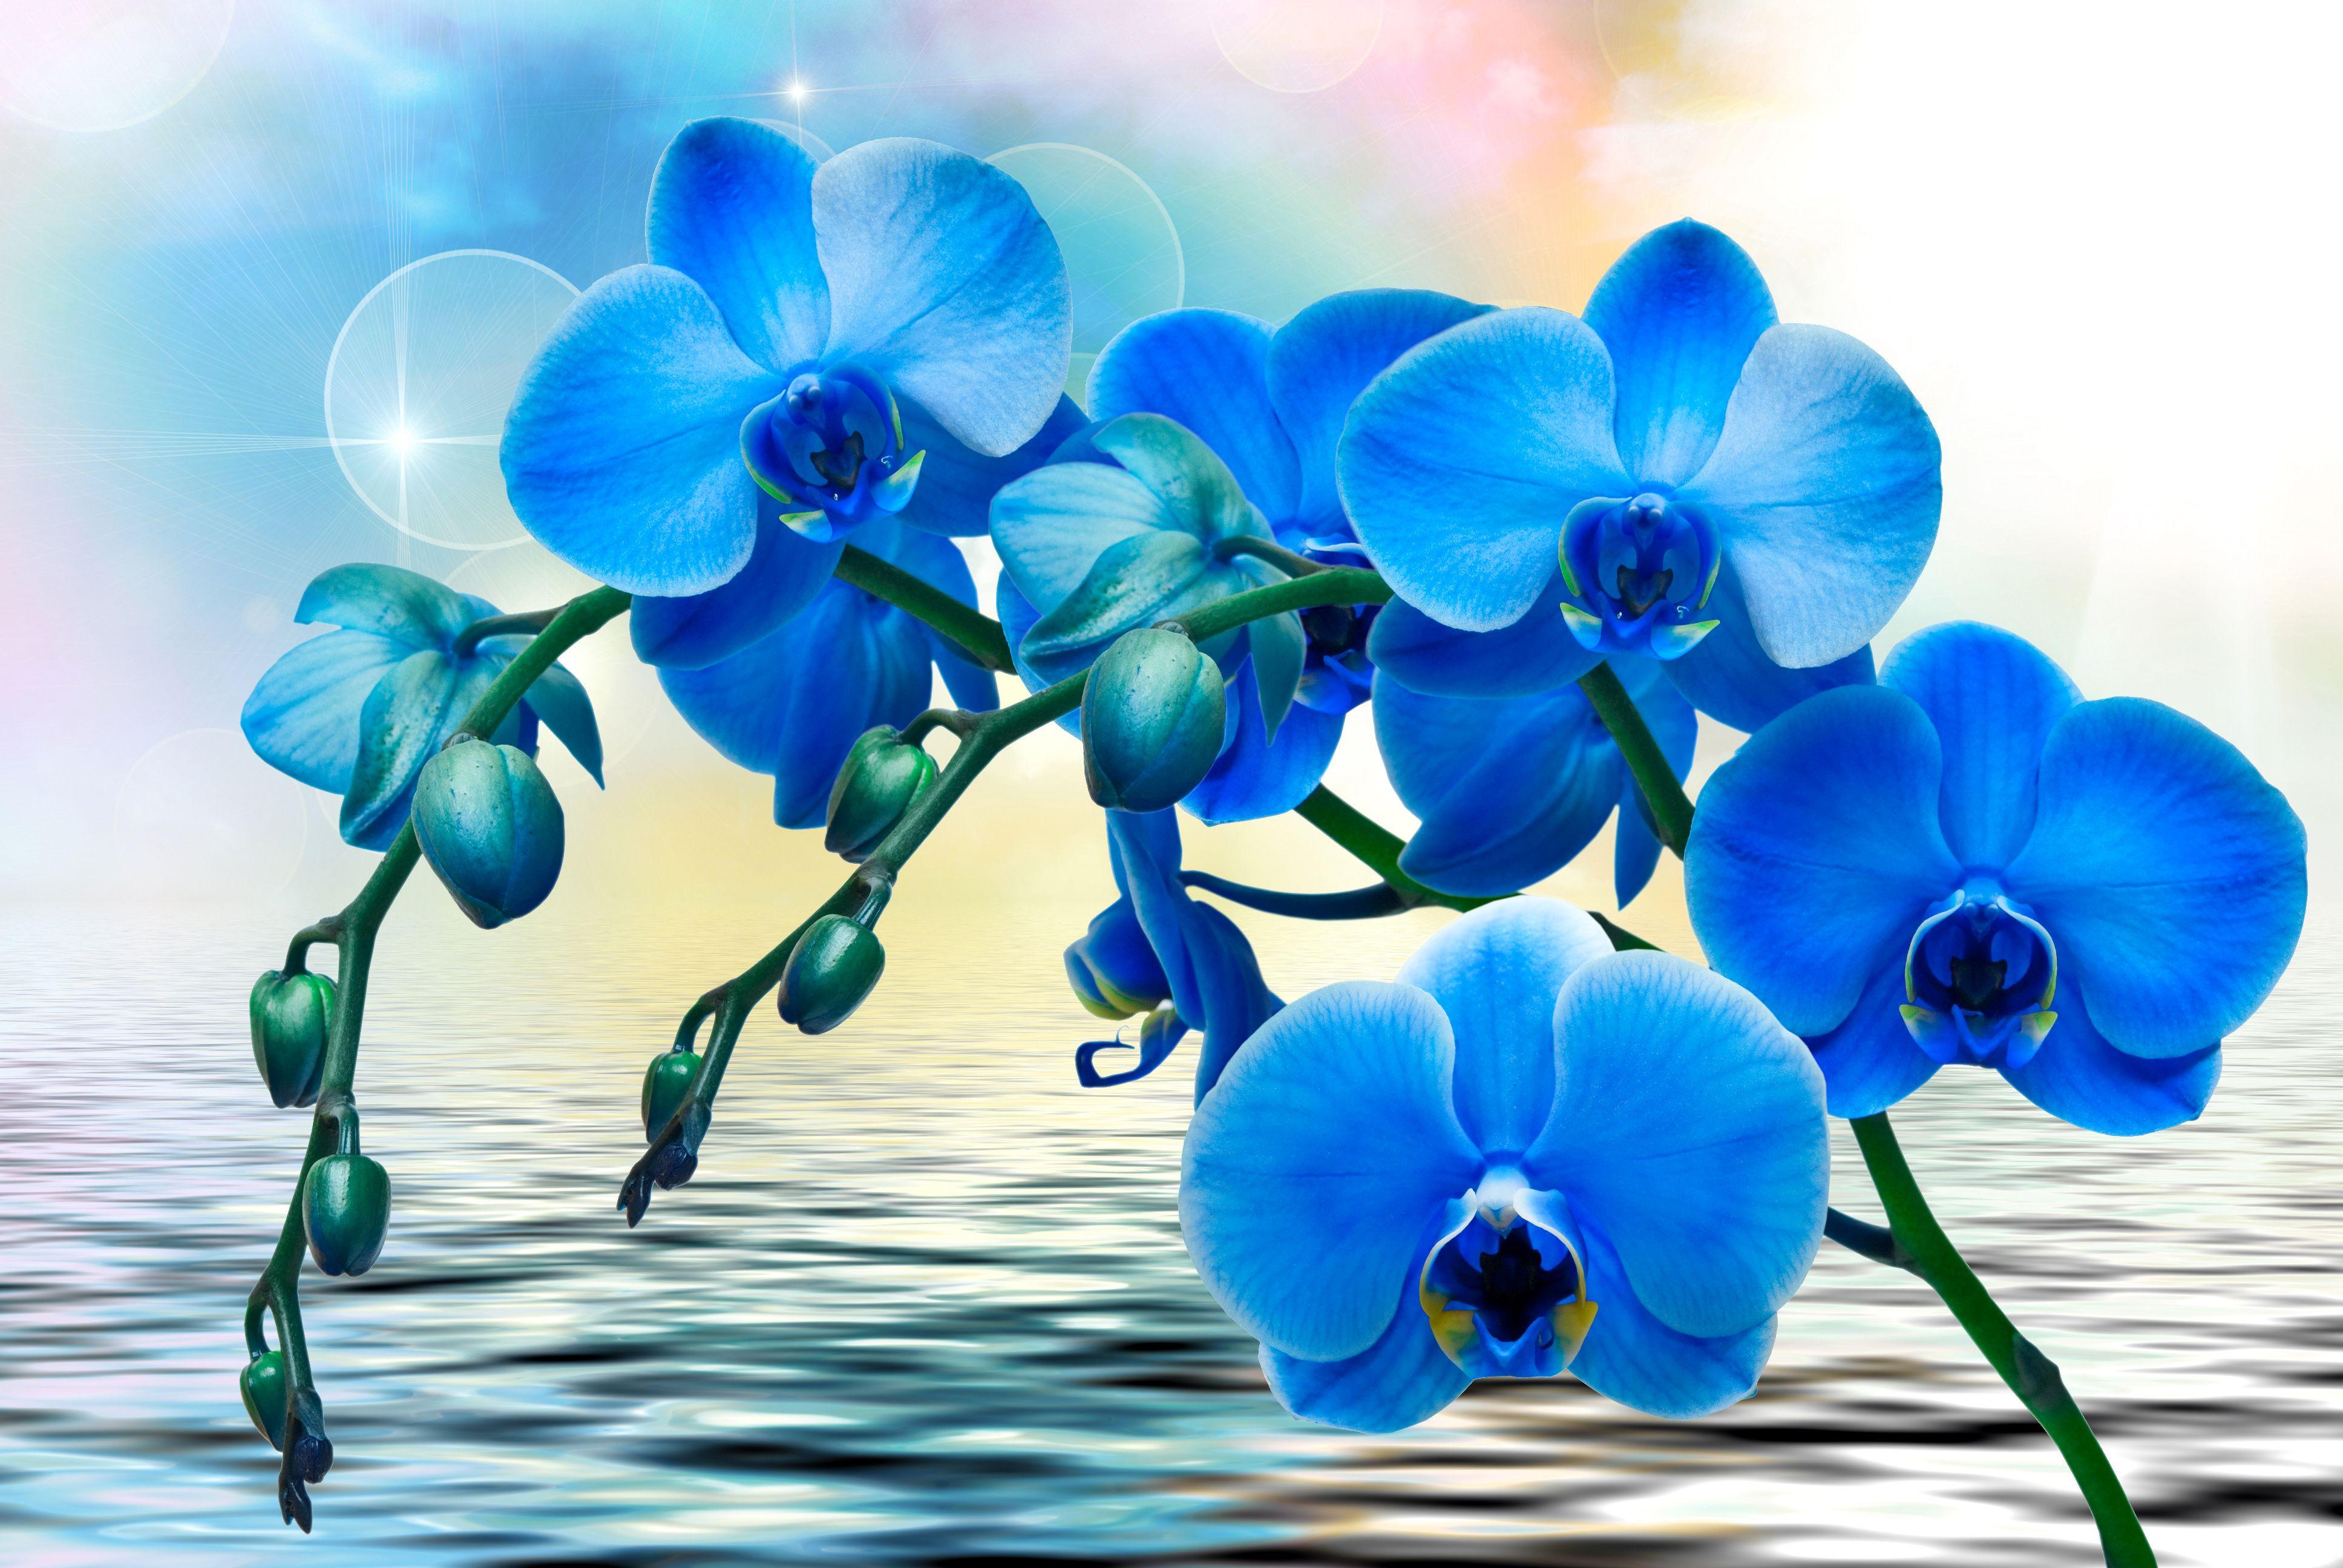 Blue Orchids 4k Ultra HD Wallpaper and Background Imagex2592